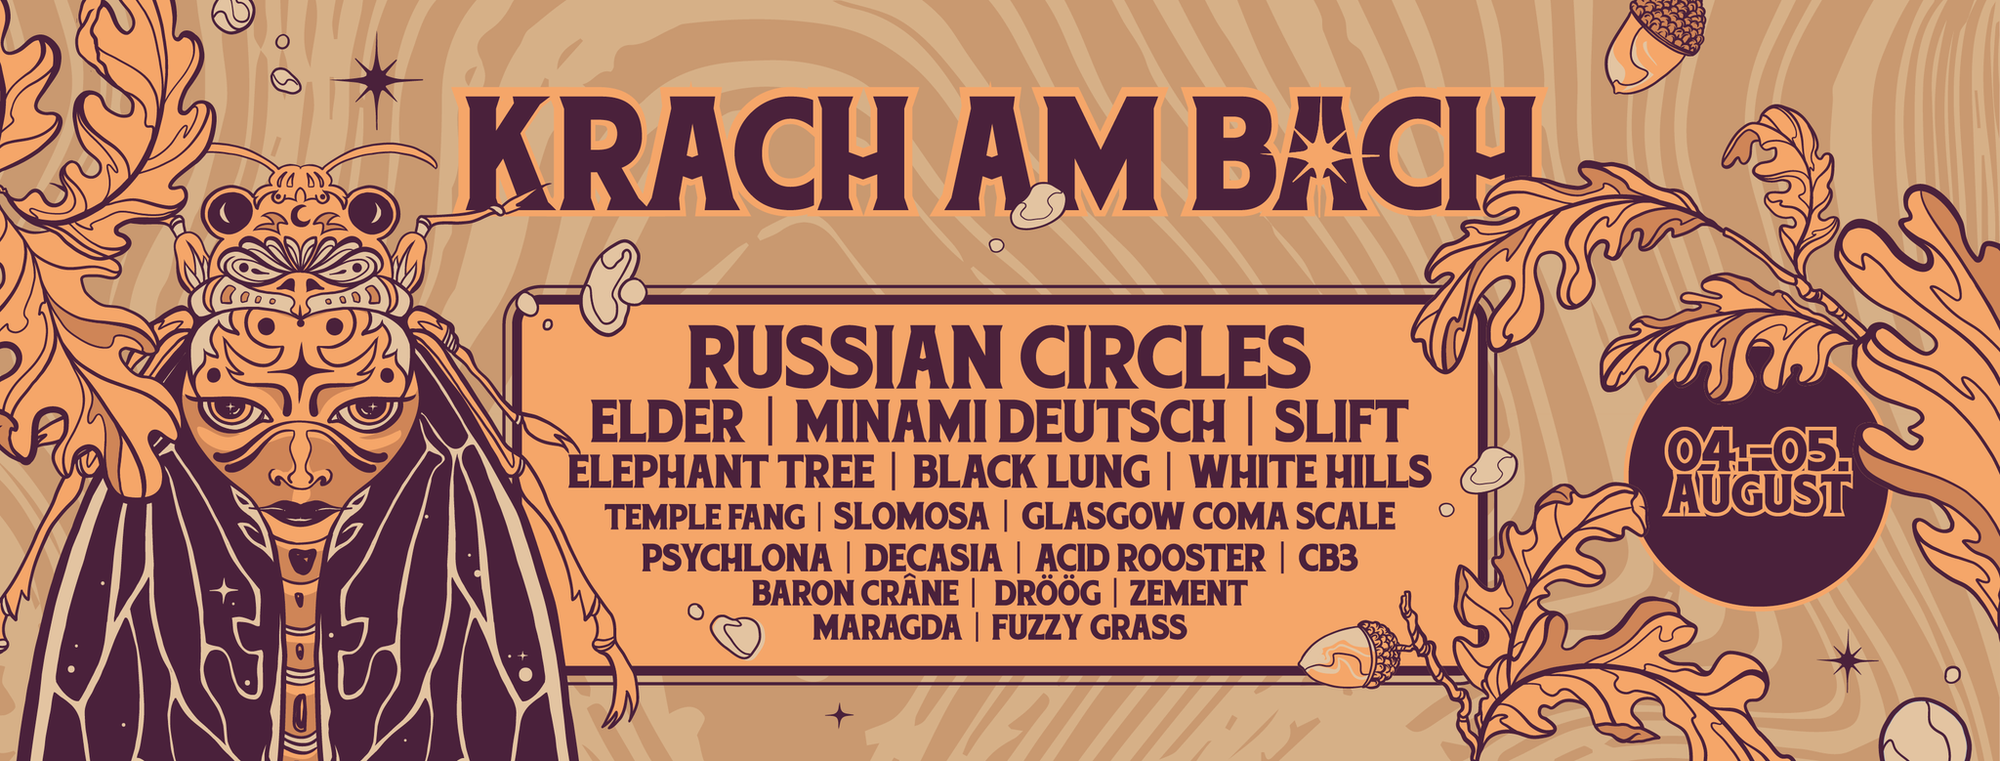 Krach am Bach´s line-up is complete